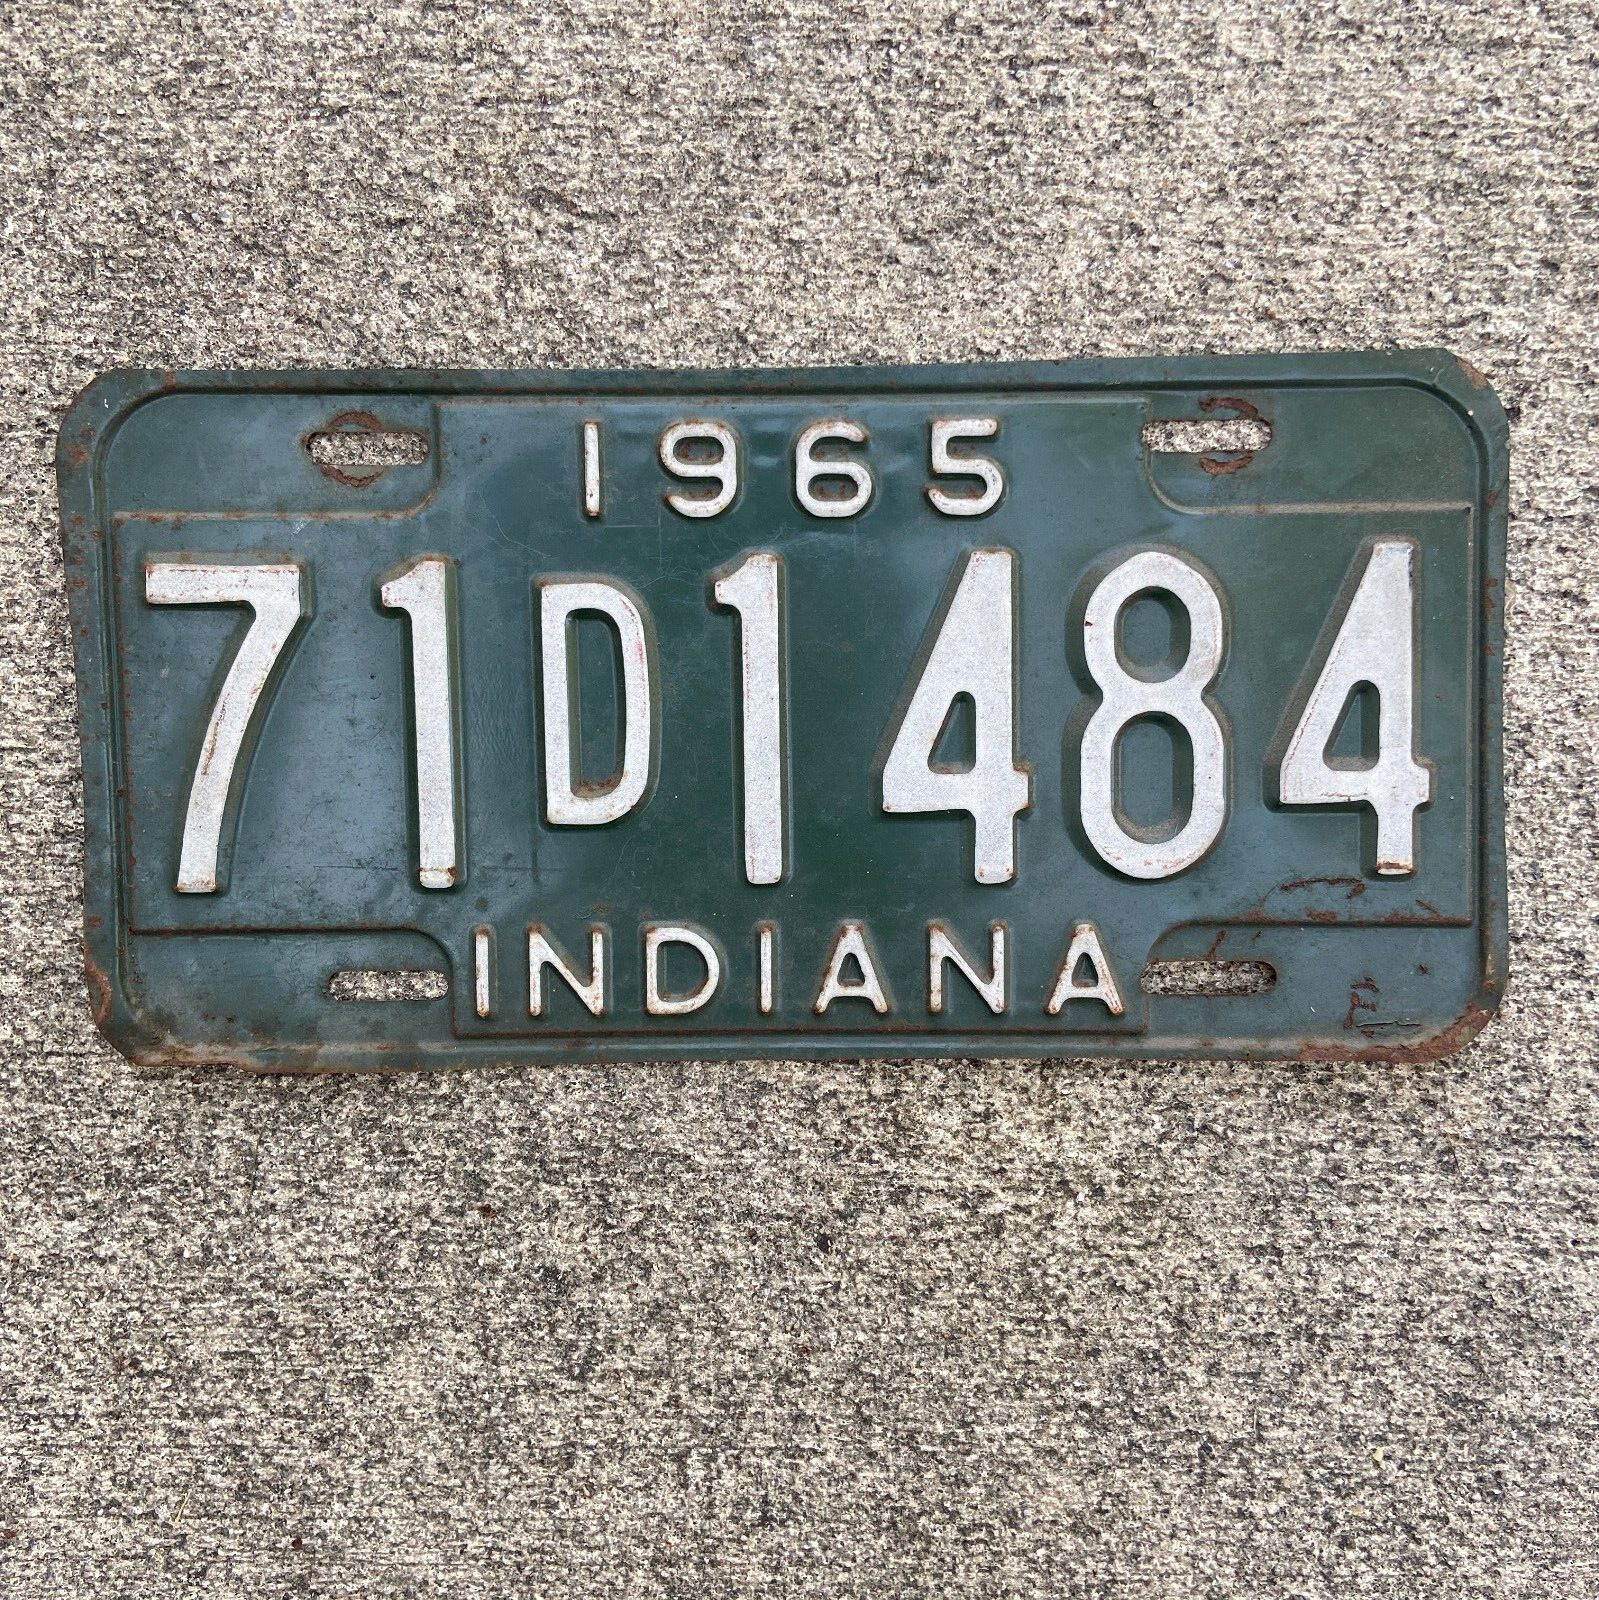 Vintage 1965 Indiana License Plate 71 D 1484 Green White IND-65